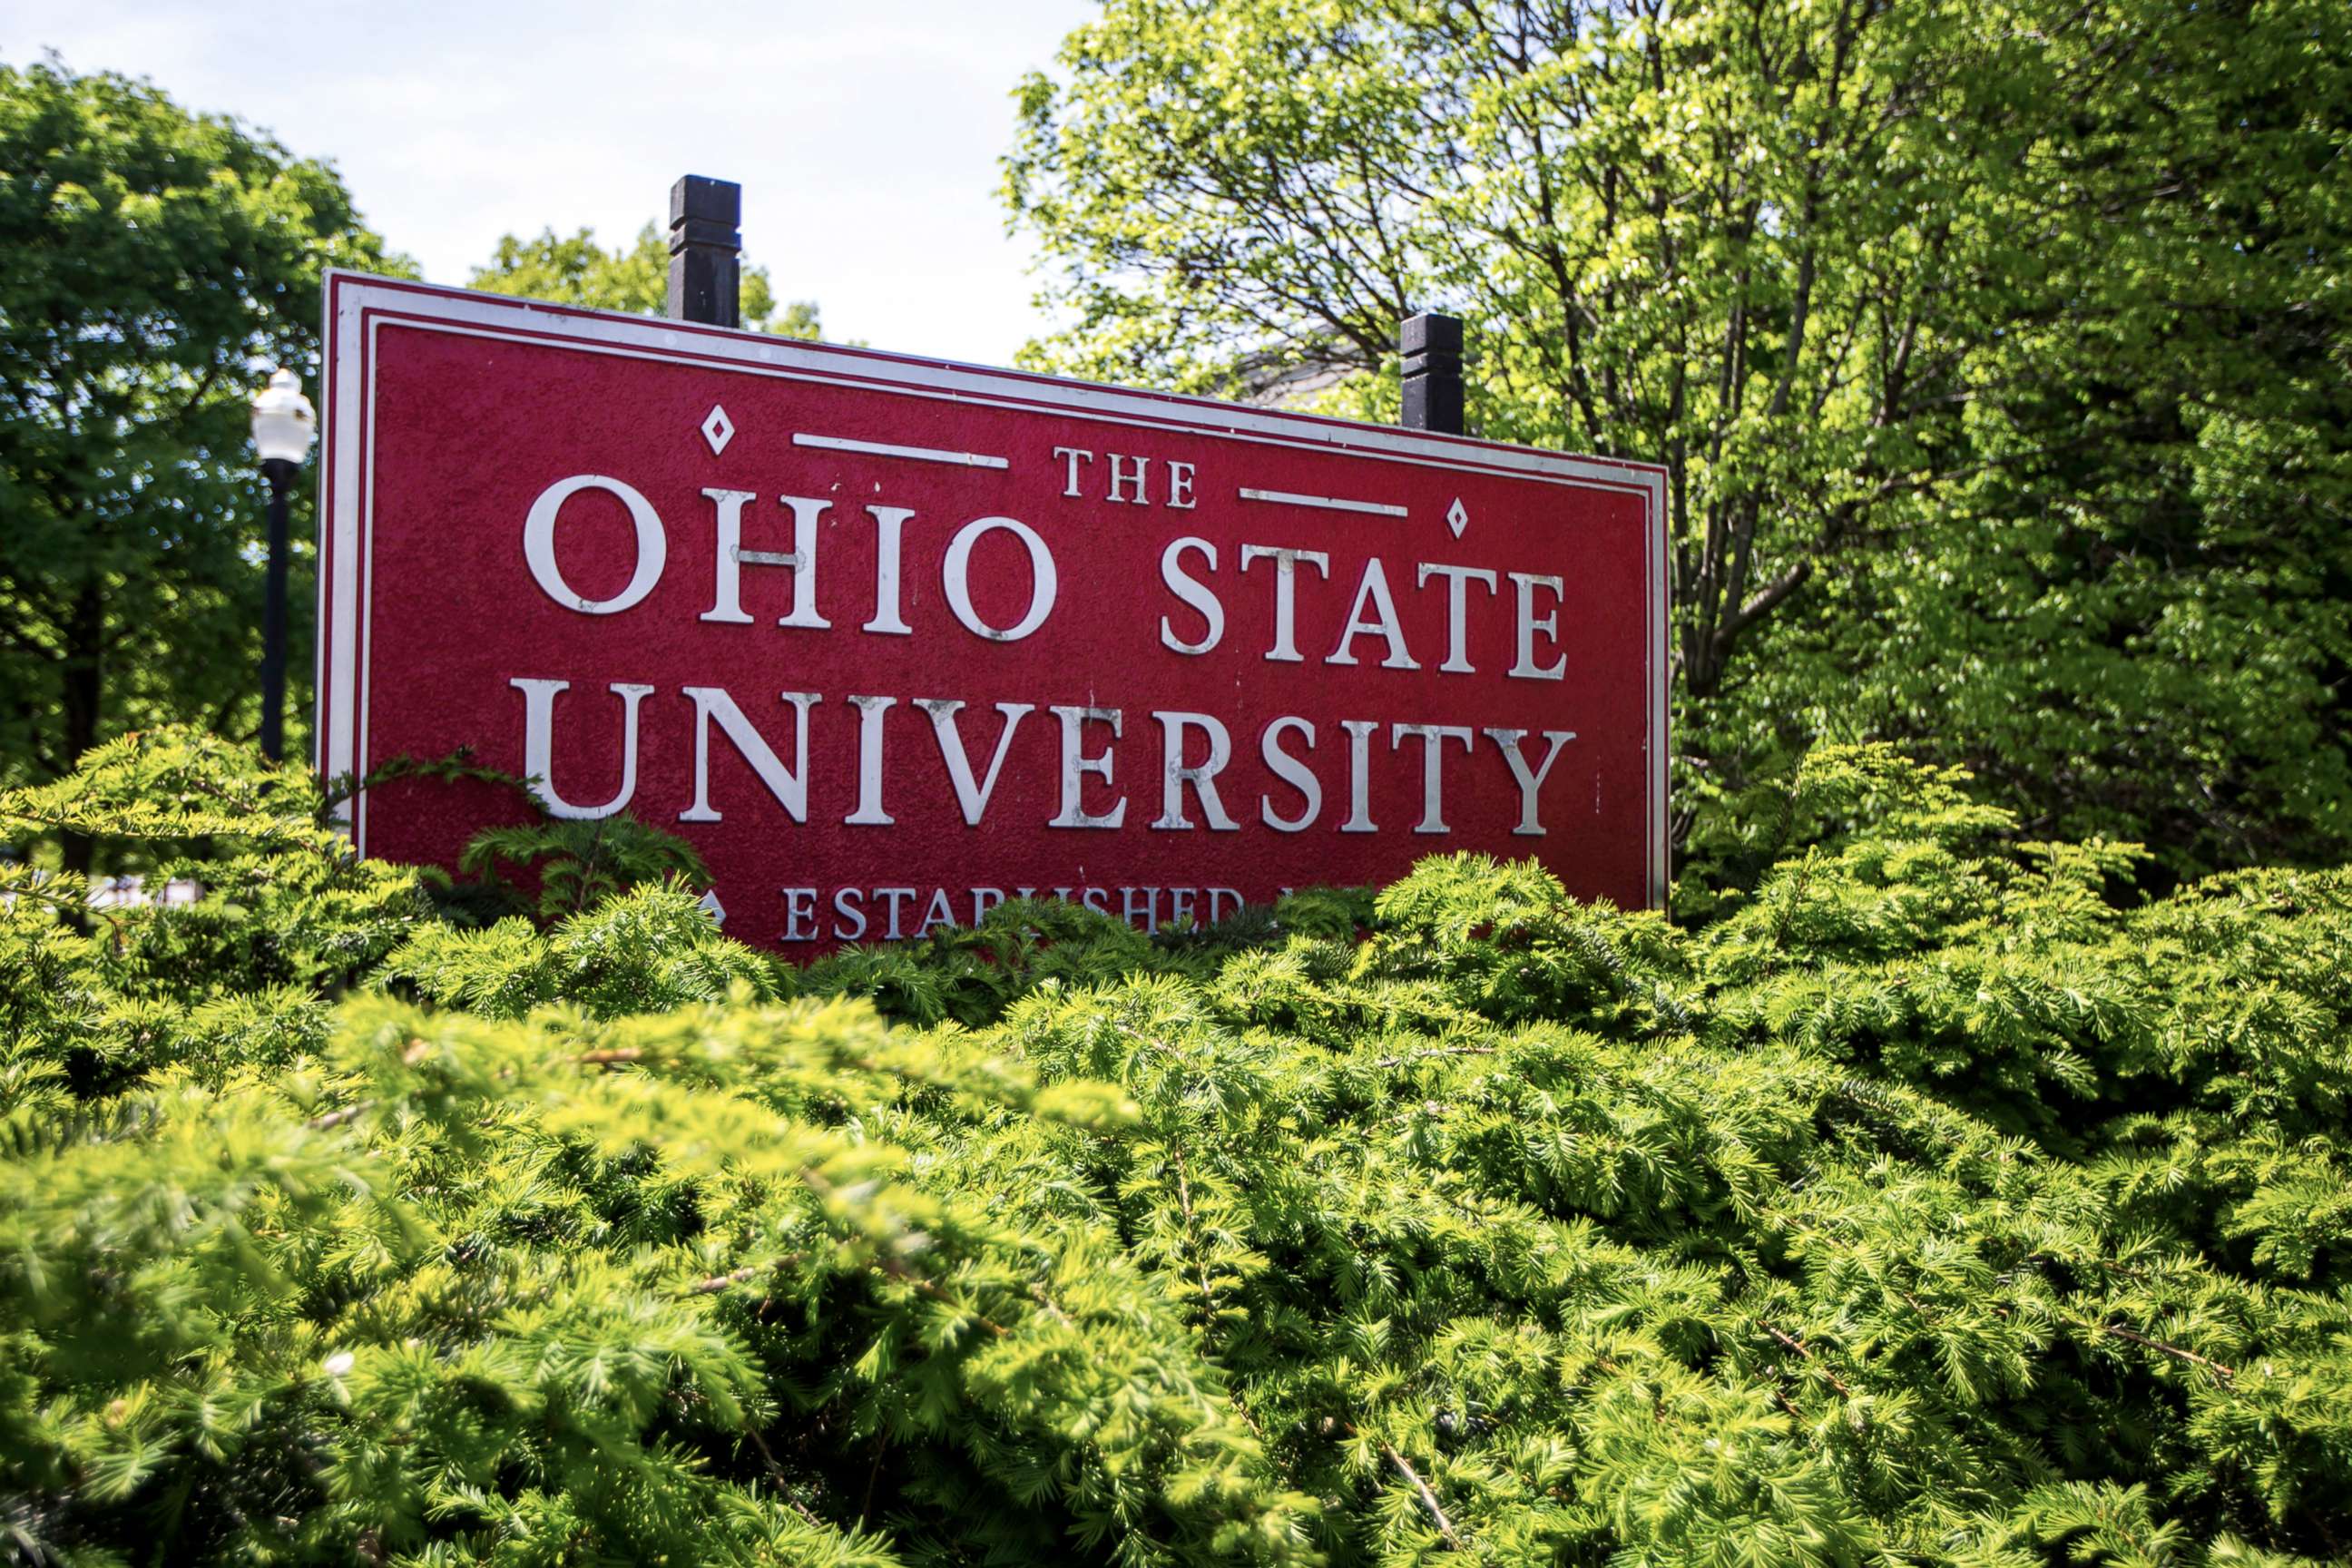 PHOTO: In this May 8, 2019, file photo, a sign for Ohio State University is shown in Columbus, Ohio.